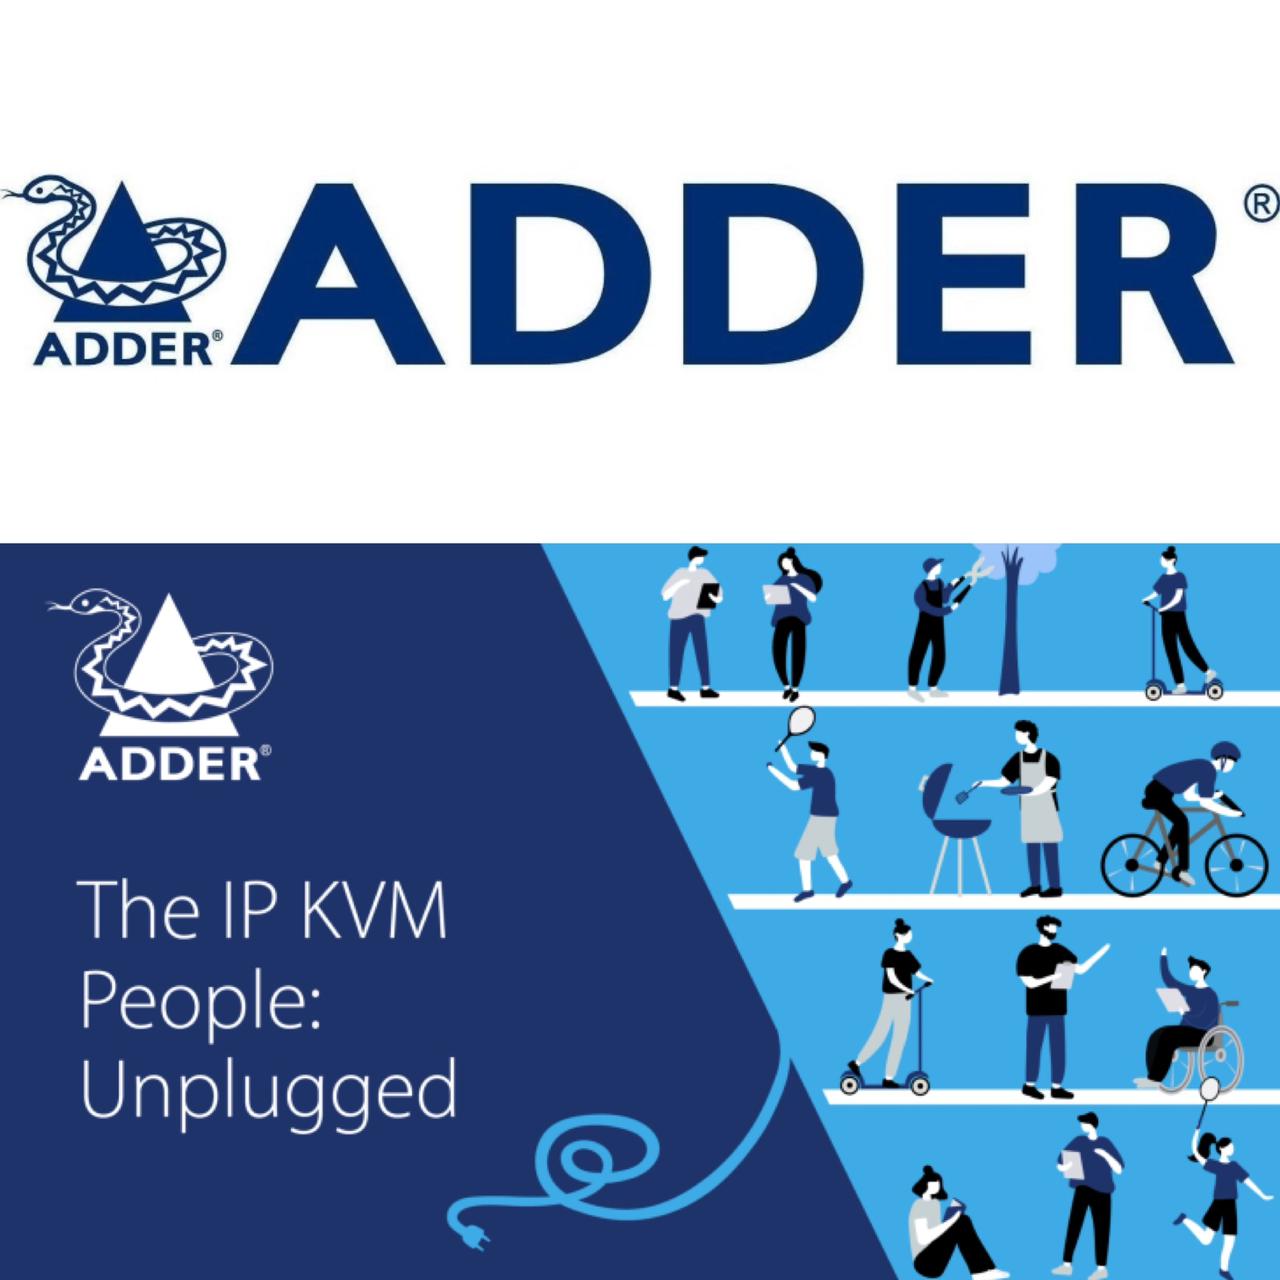 Official distributor of Adder Technology